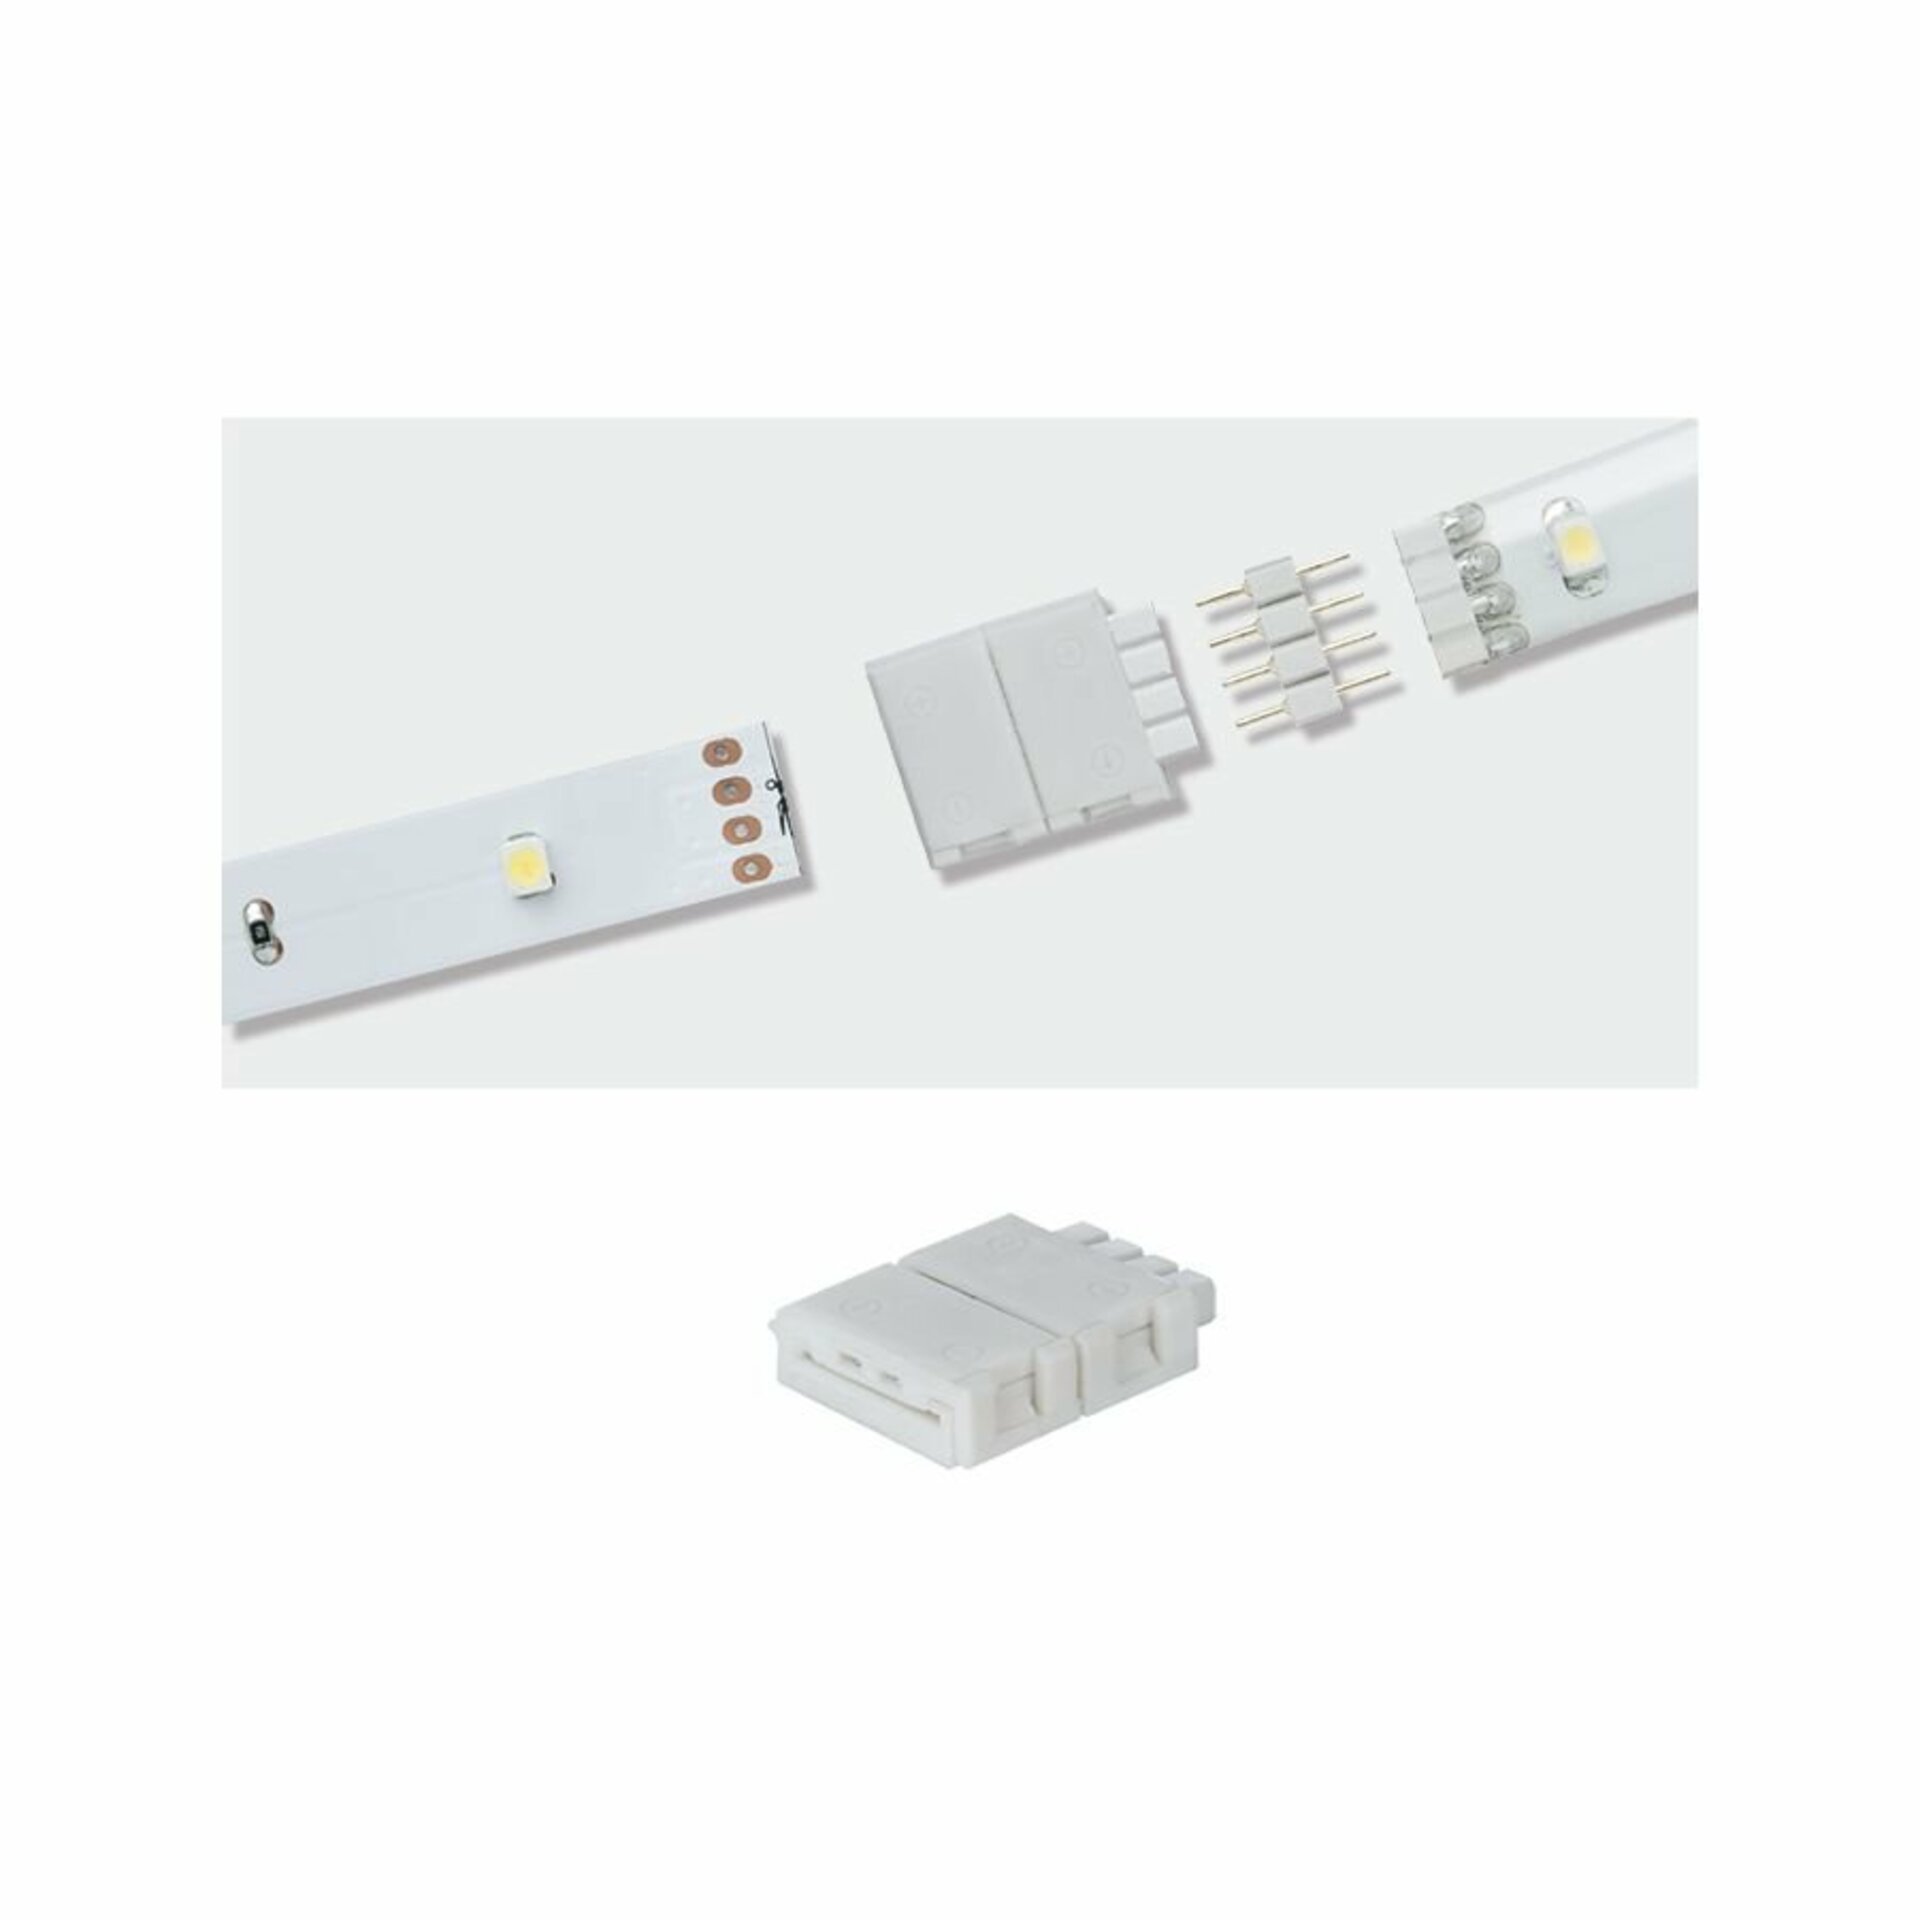 Product Images